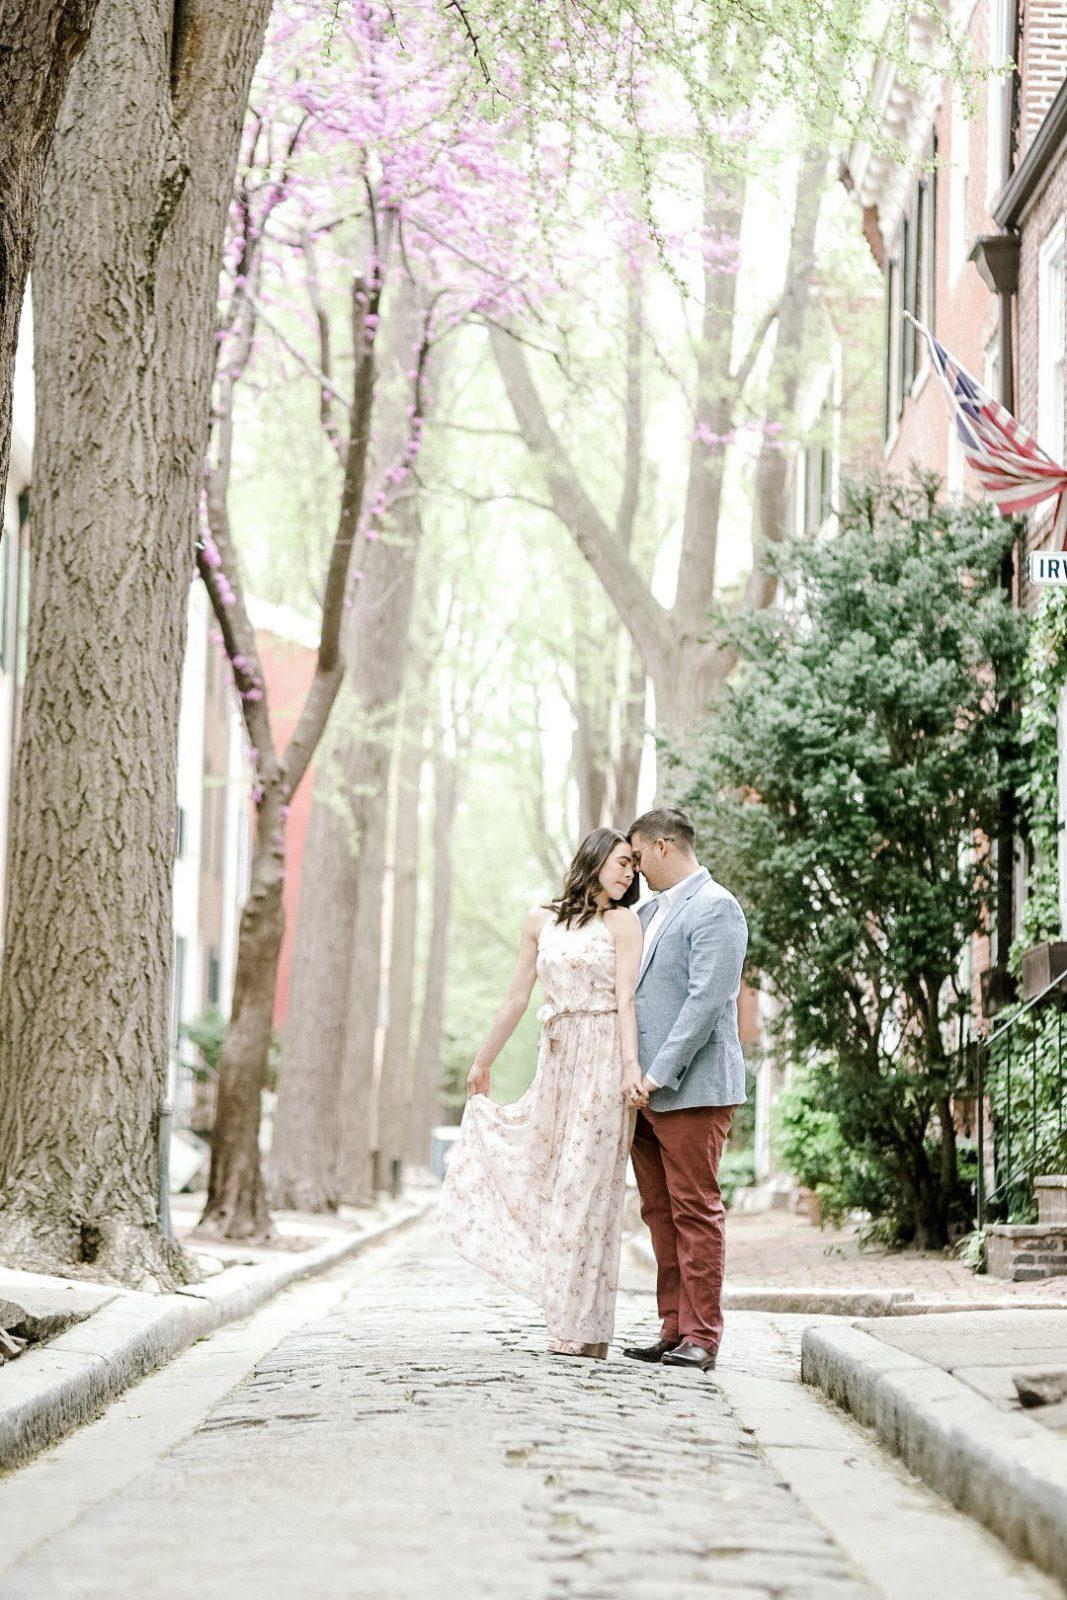 Quince Street engagement photo in Philadelphia by clicke photography.